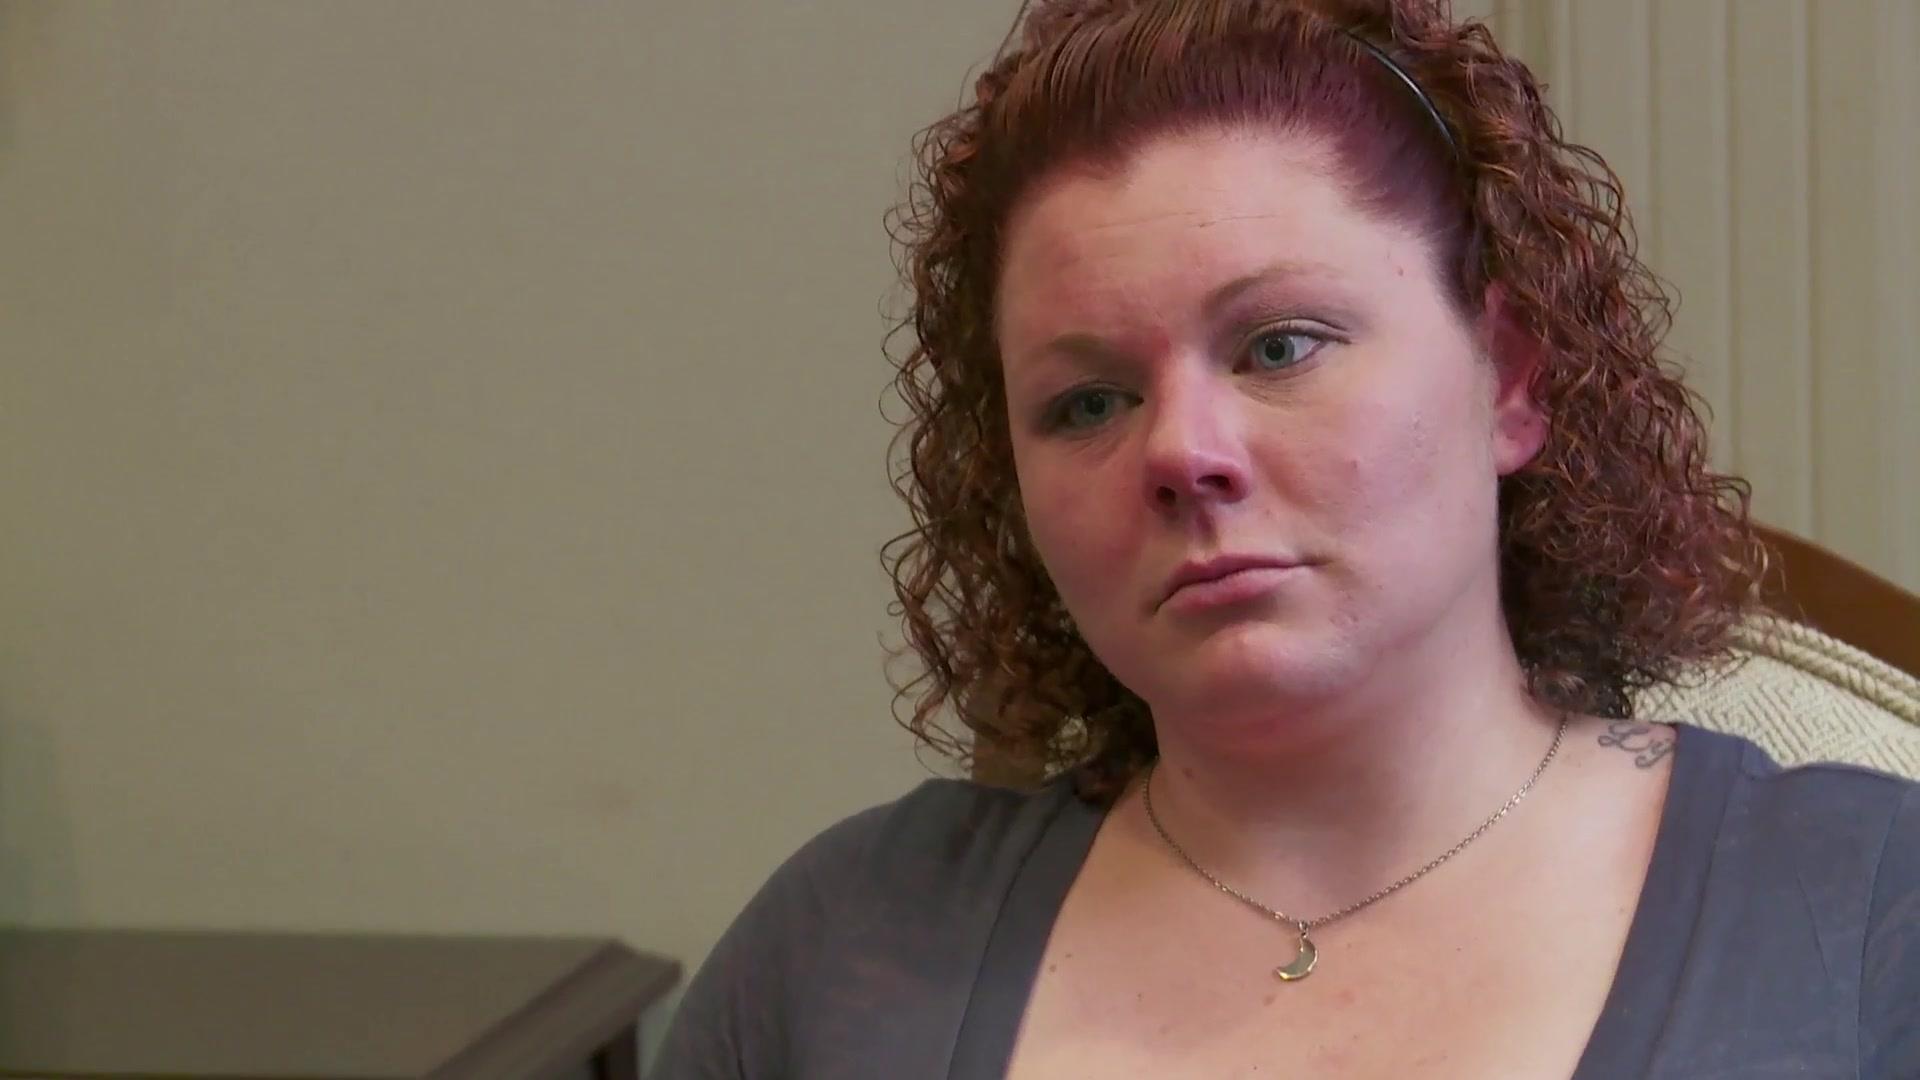 Watch The Law is Still Keeping Courtney & Josh Apart! | Love After Lockup Video Extras